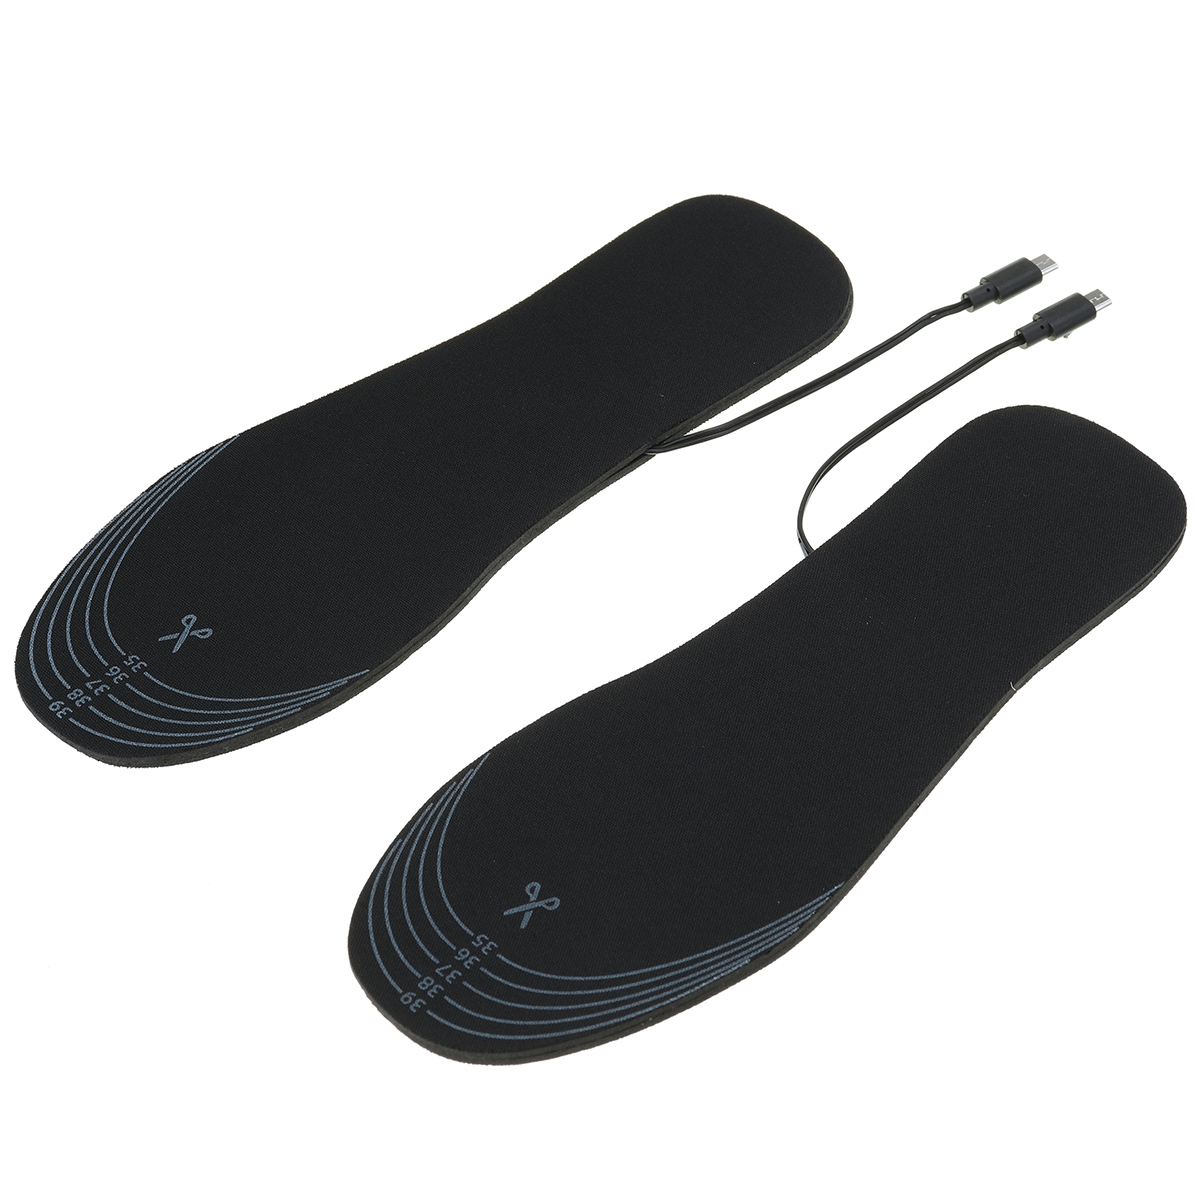 USB-Electric-Heated-Shoe-Insoles-Electric-Film-Feet-Heater-Outdoor-Warm-Socks-Pads-Winter-Sports-Acc-1809982-6